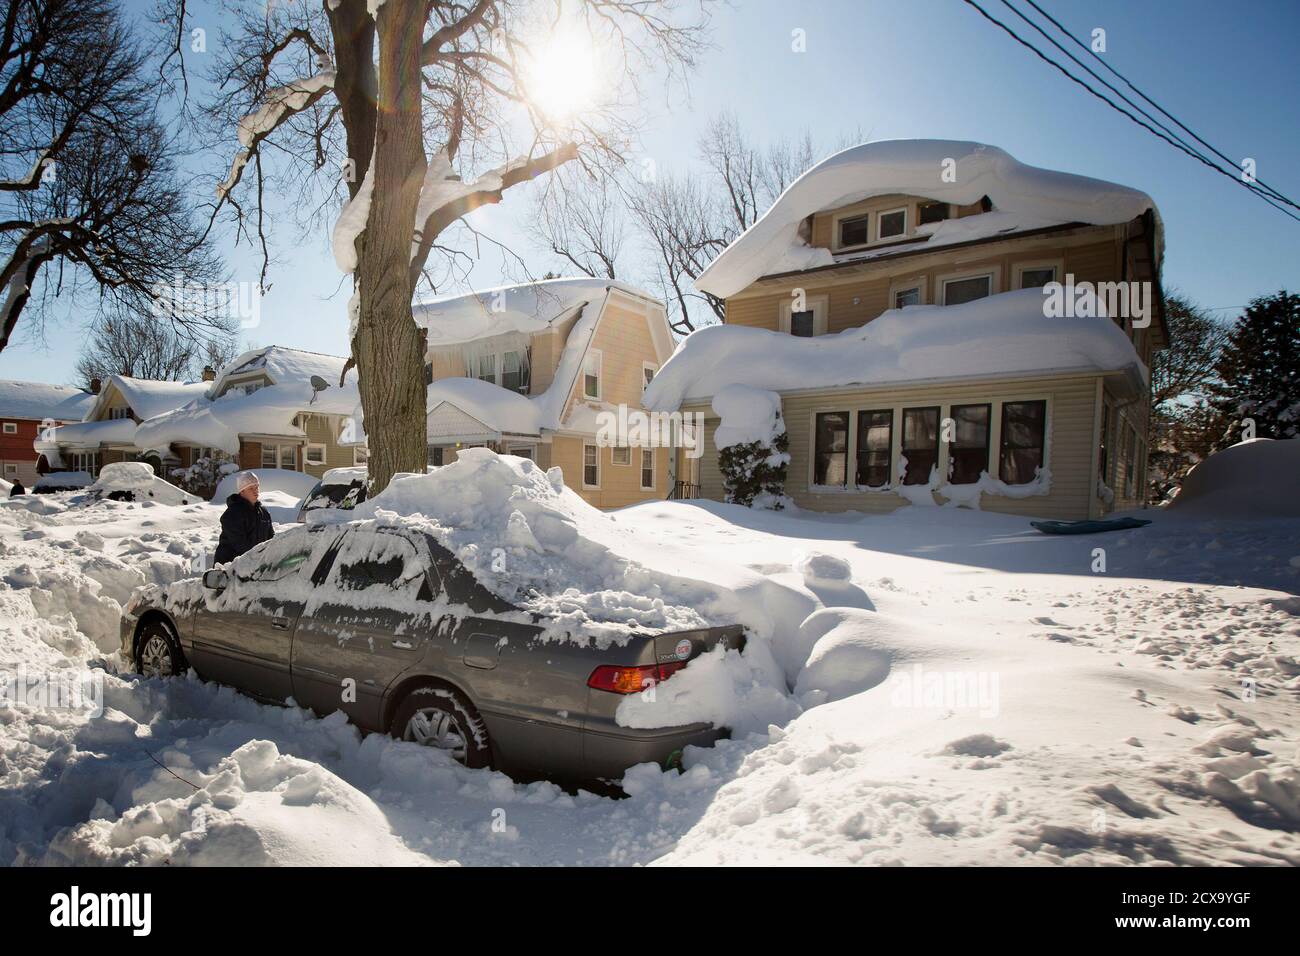 A man digs out his snow-covered car in Buffalo, New York, November 2014. Warm temperatures and rain were forecast for the weekend in the city of Buffalo and western New York,